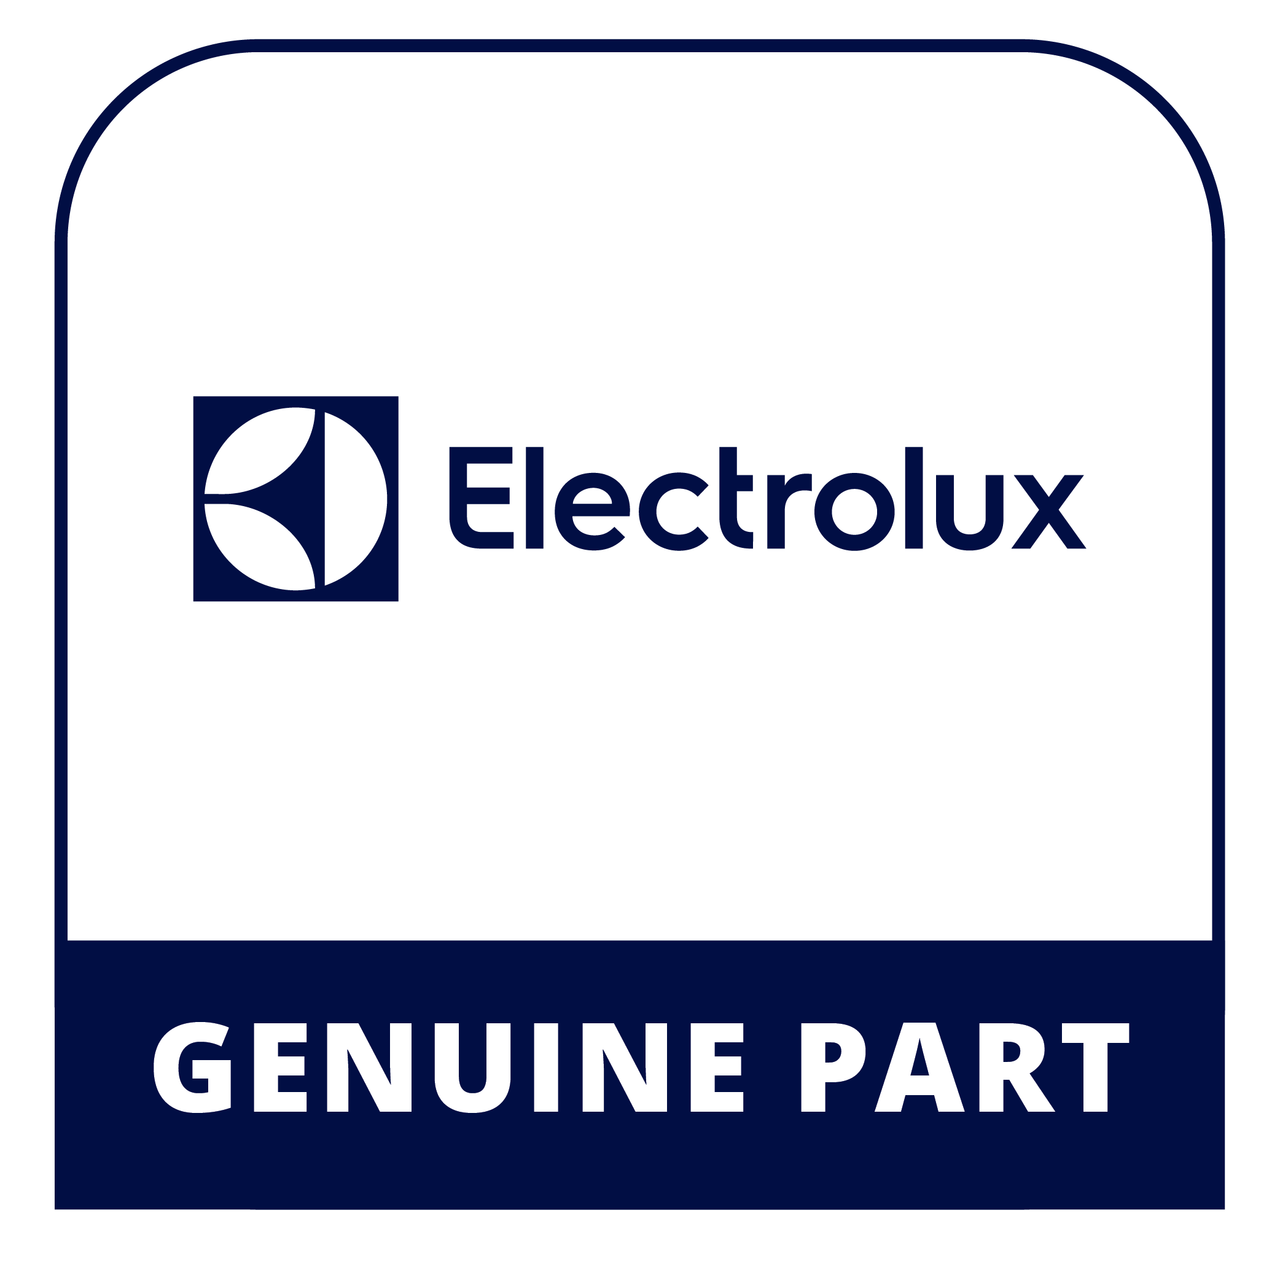 Frigidaire - Electrolux 318205837 Owners Manual - Genuine Electrolux Part